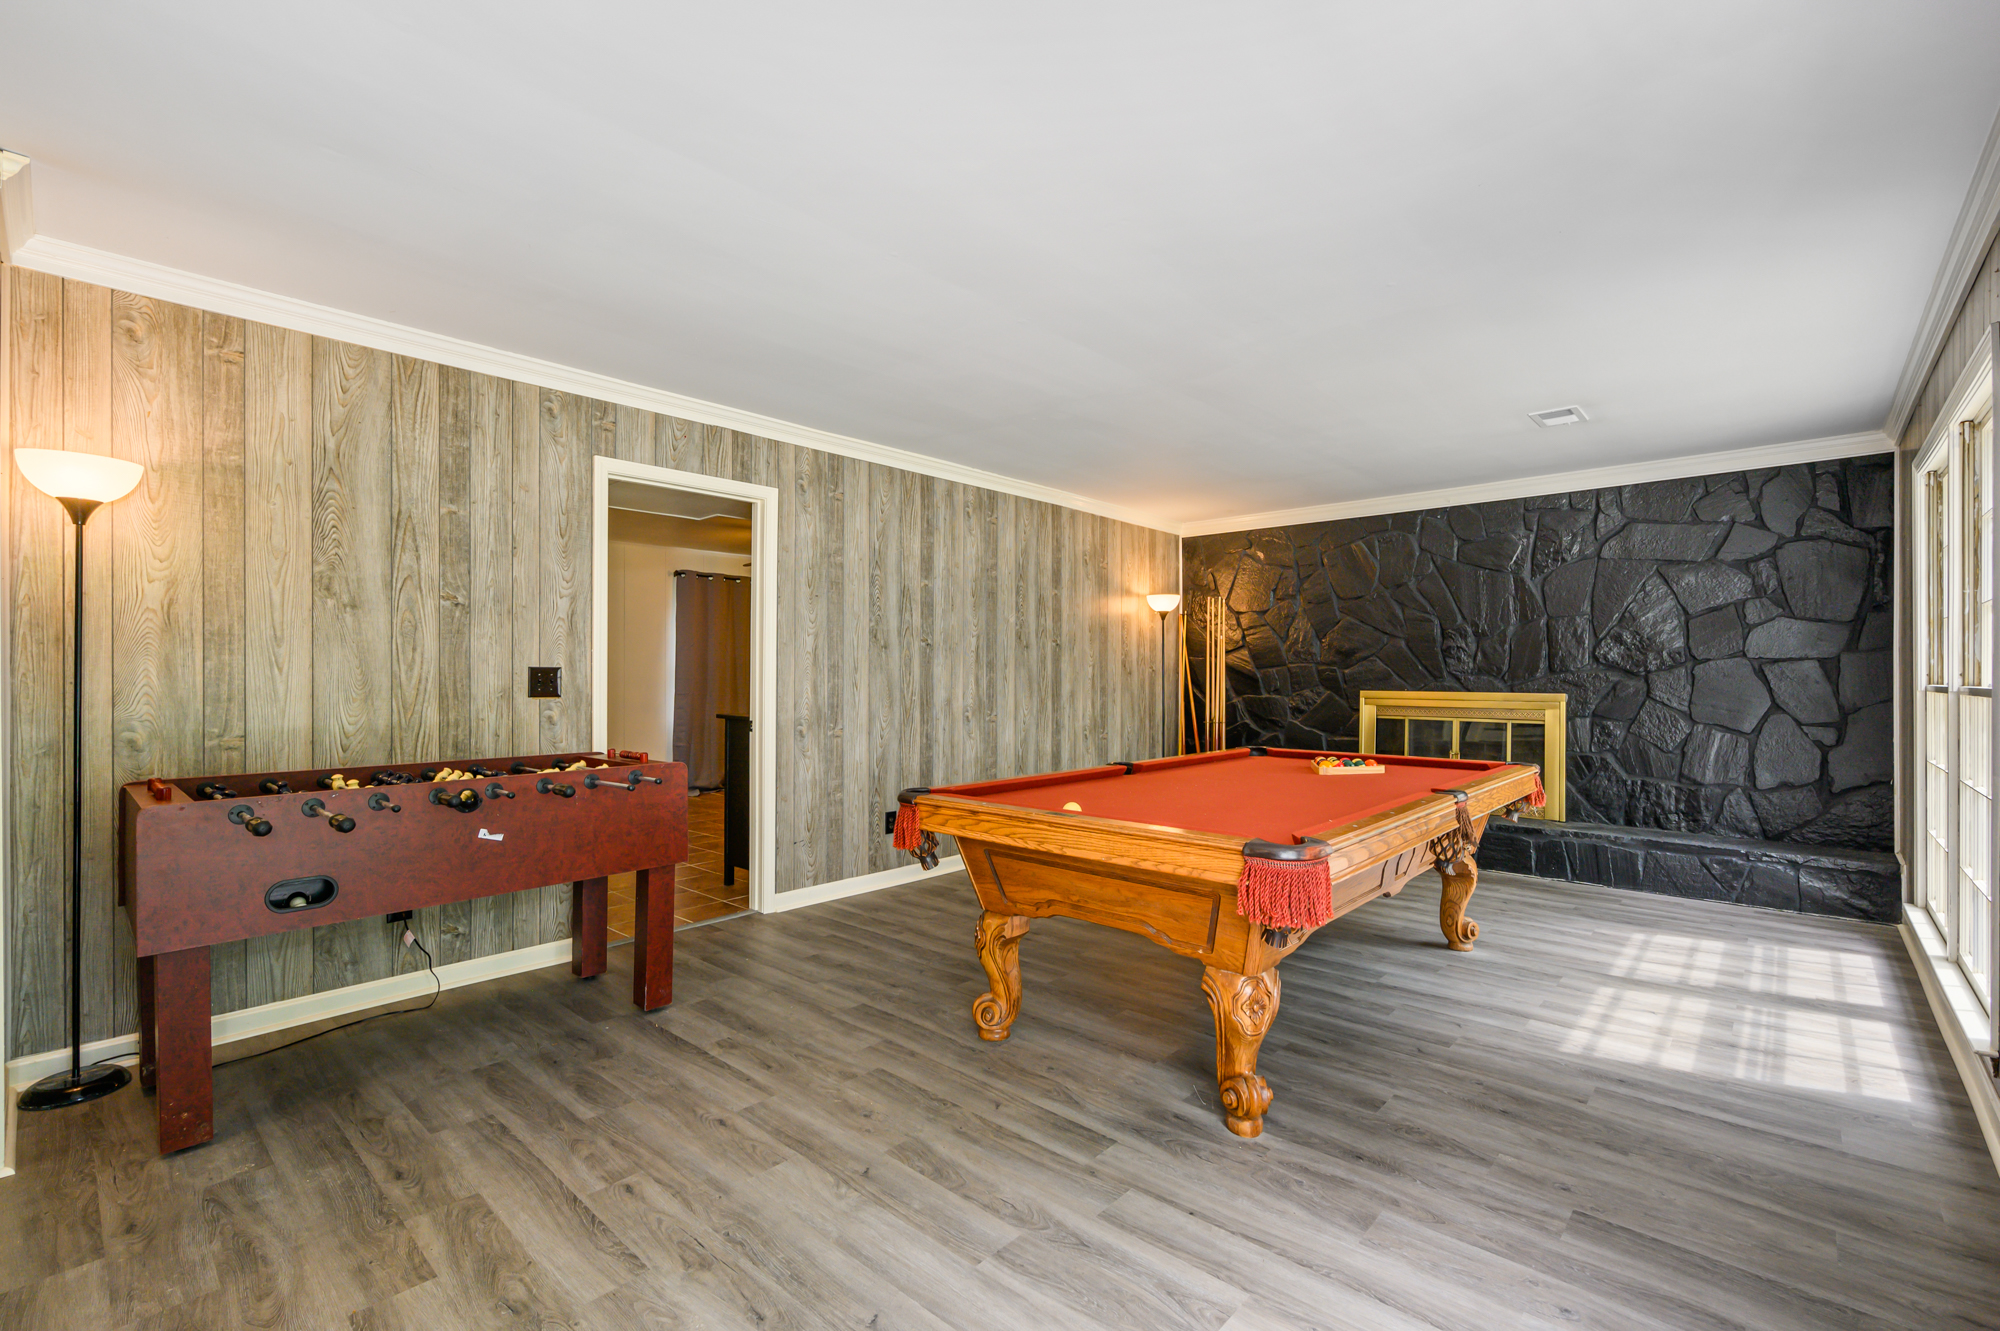 Enjoy This Roomy Cabin Style 5BR With A Pool Table